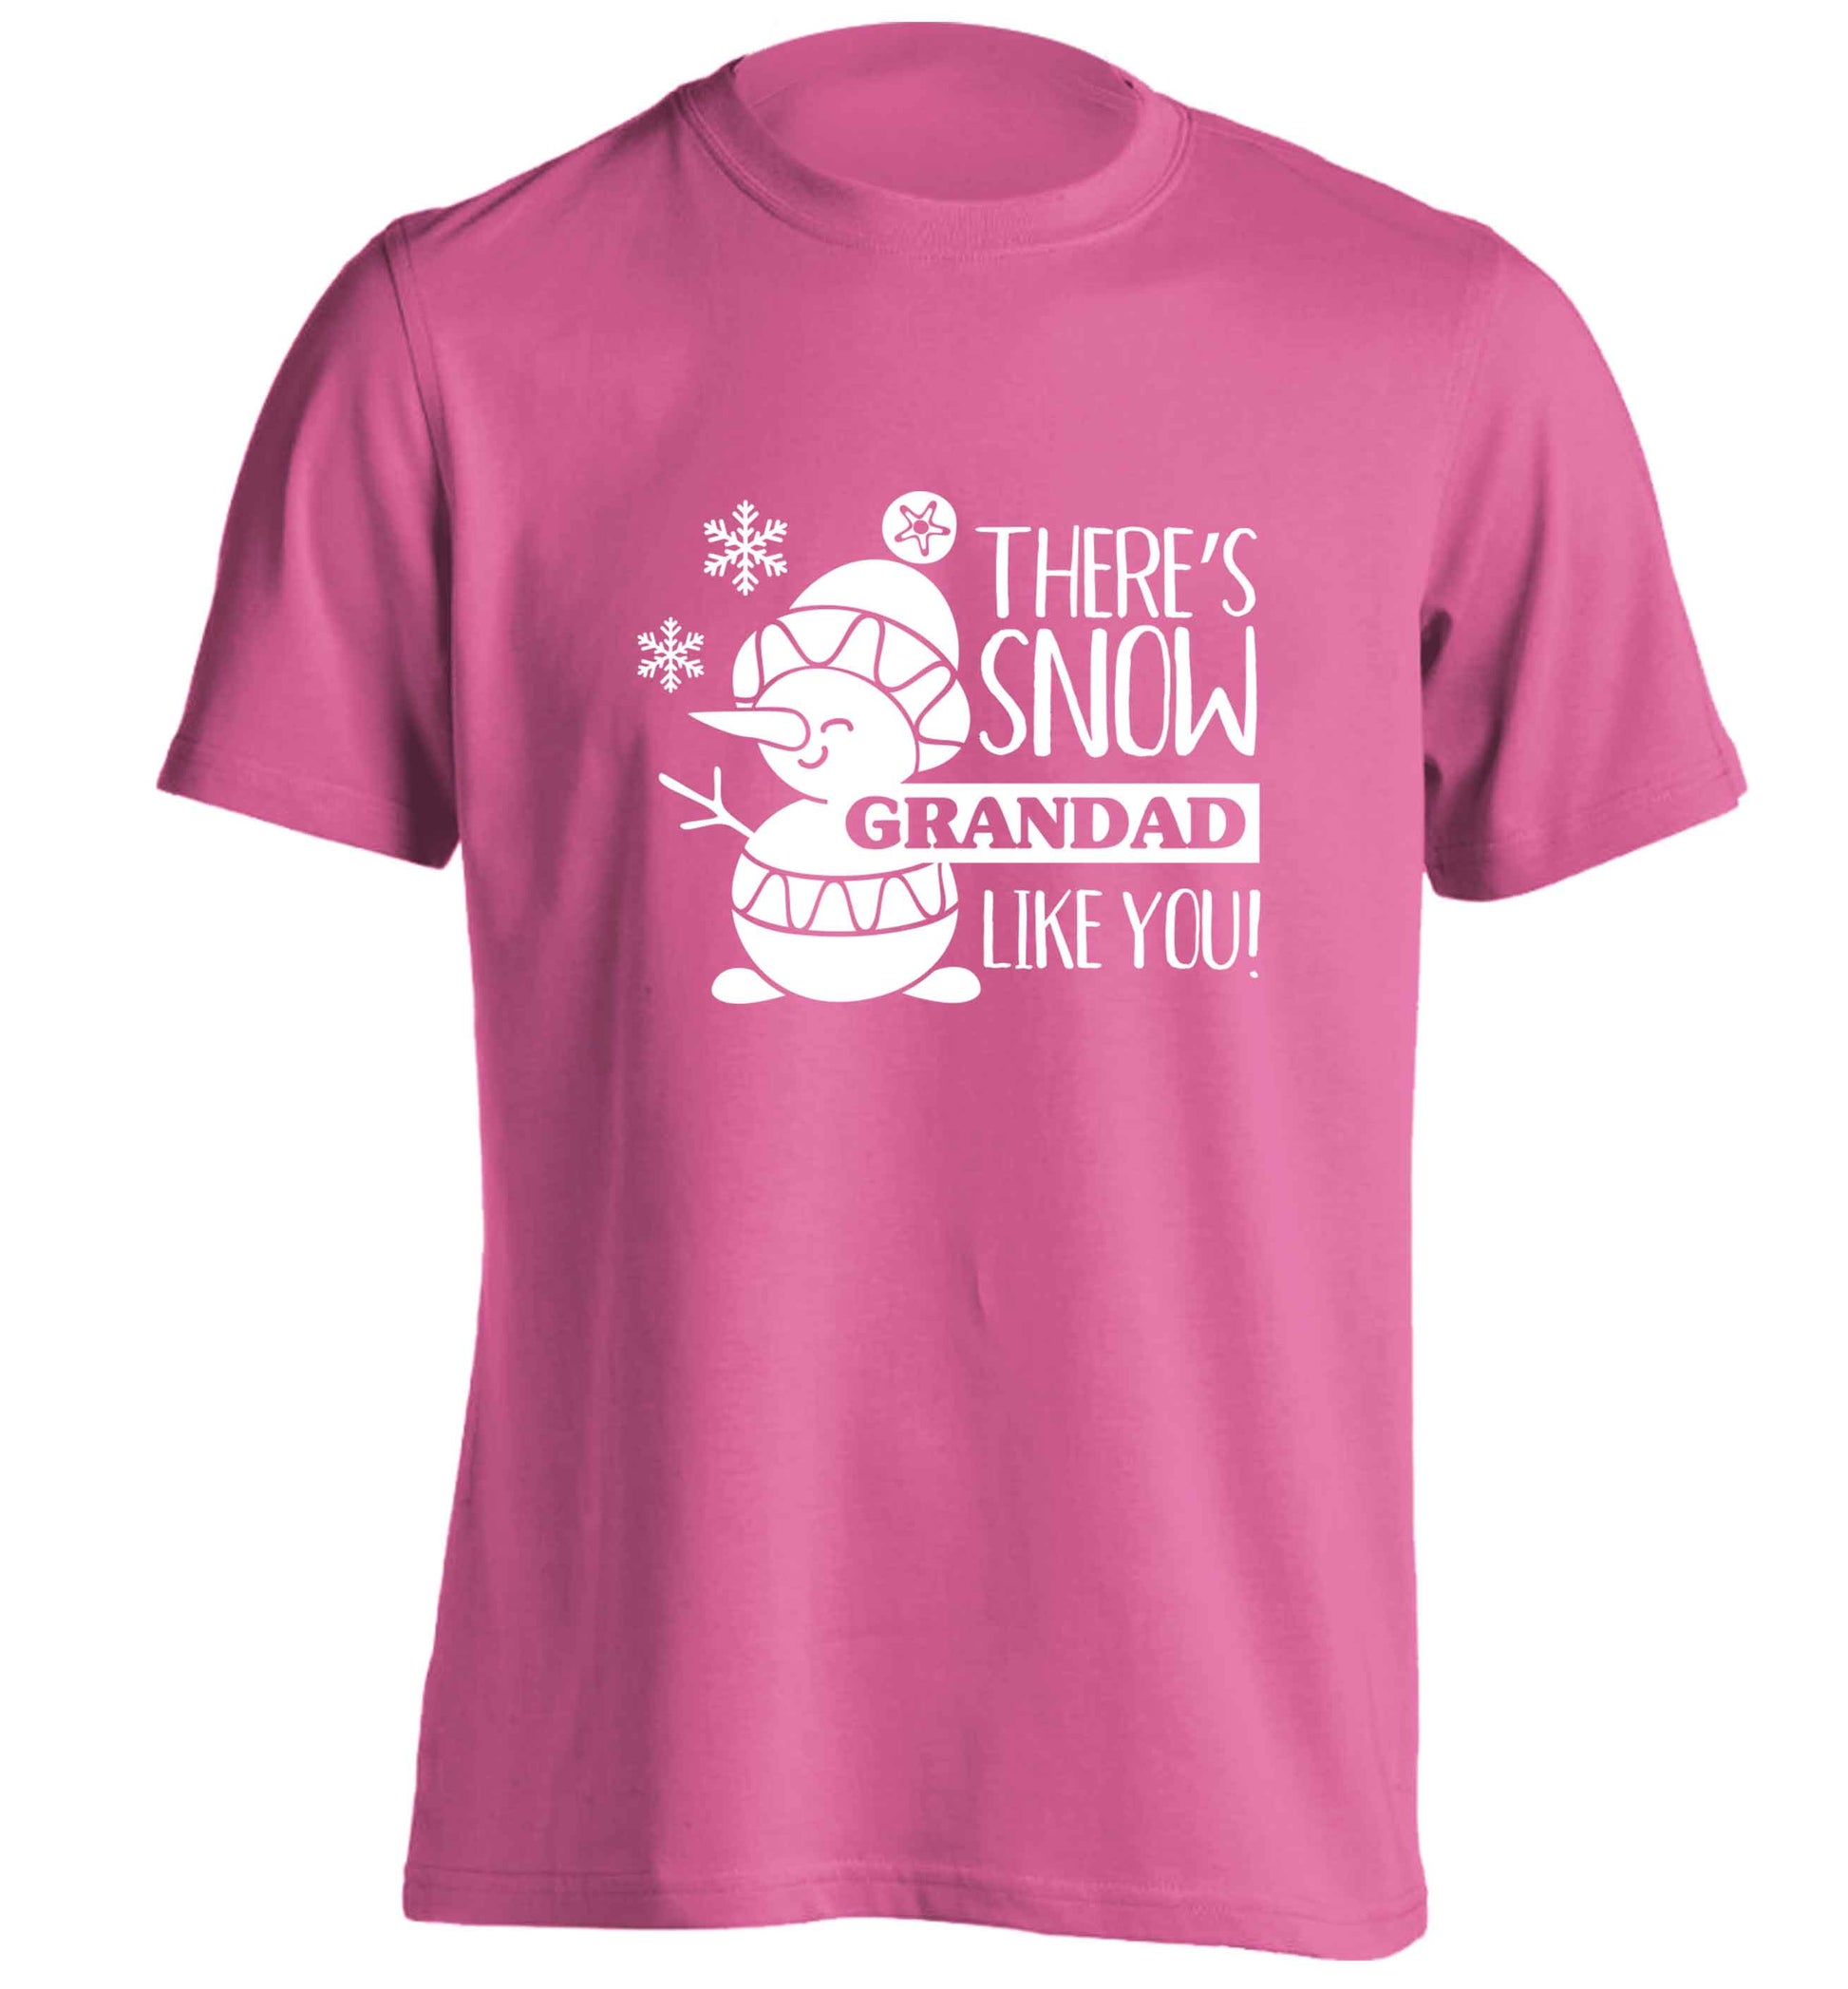 There's snow grandad like you adults unisex pink Tshirt 2XL